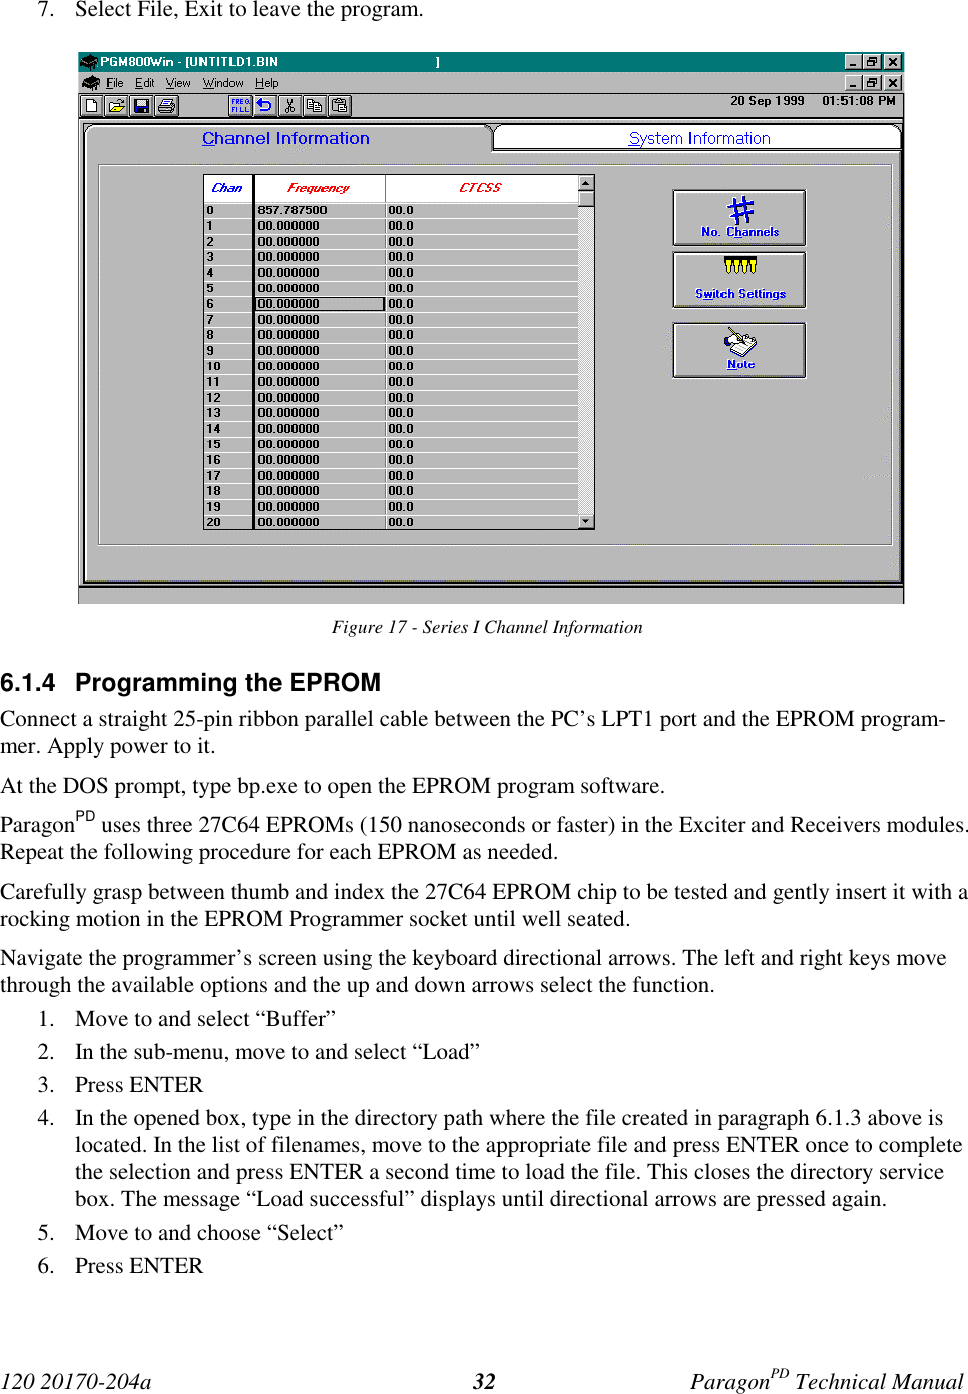 120 20170-204a ParagonPD Technical Manual327. Select File, Exit to leave the program.Figure 17 - Series I Channel Information6.1.4  Programming the EPROMConnect a straight 25-pin ribbon parallel cable between the PC’s LPT1 port and the EPROM program-mer. Apply power to it.At the DOS prompt, type bp.exe to open the EPROM program software.ParagonPD uses three 27C64 EPROMs (150 nanoseconds or faster) in the Exciter and Receivers modules.Repeat the following procedure for each EPROM as needed.Carefully grasp between thumb and index the 27C64 EPROM chip to be tested and gently insert it with arocking motion in the EPROM Programmer socket until well seated.Navigate the programmer’s screen using the keyboard directional arrows. The left and right keys movethrough the available options and the up and down arrows select the function.1. Move to and select “Buffer”2. In the sub-menu, move to and select “Load”3. Press ENTER4. In the opened box, type in the directory path where the file created in paragraph 6.1.3 above islocated. In the list of filenames, move to the appropriate file and press ENTER once to completethe selection and press ENTER a second time to load the file. This closes the directory servicebox. The message “Load successful” displays until directional arrows are pressed again.5. Move to and choose “Select”6. Press ENTER